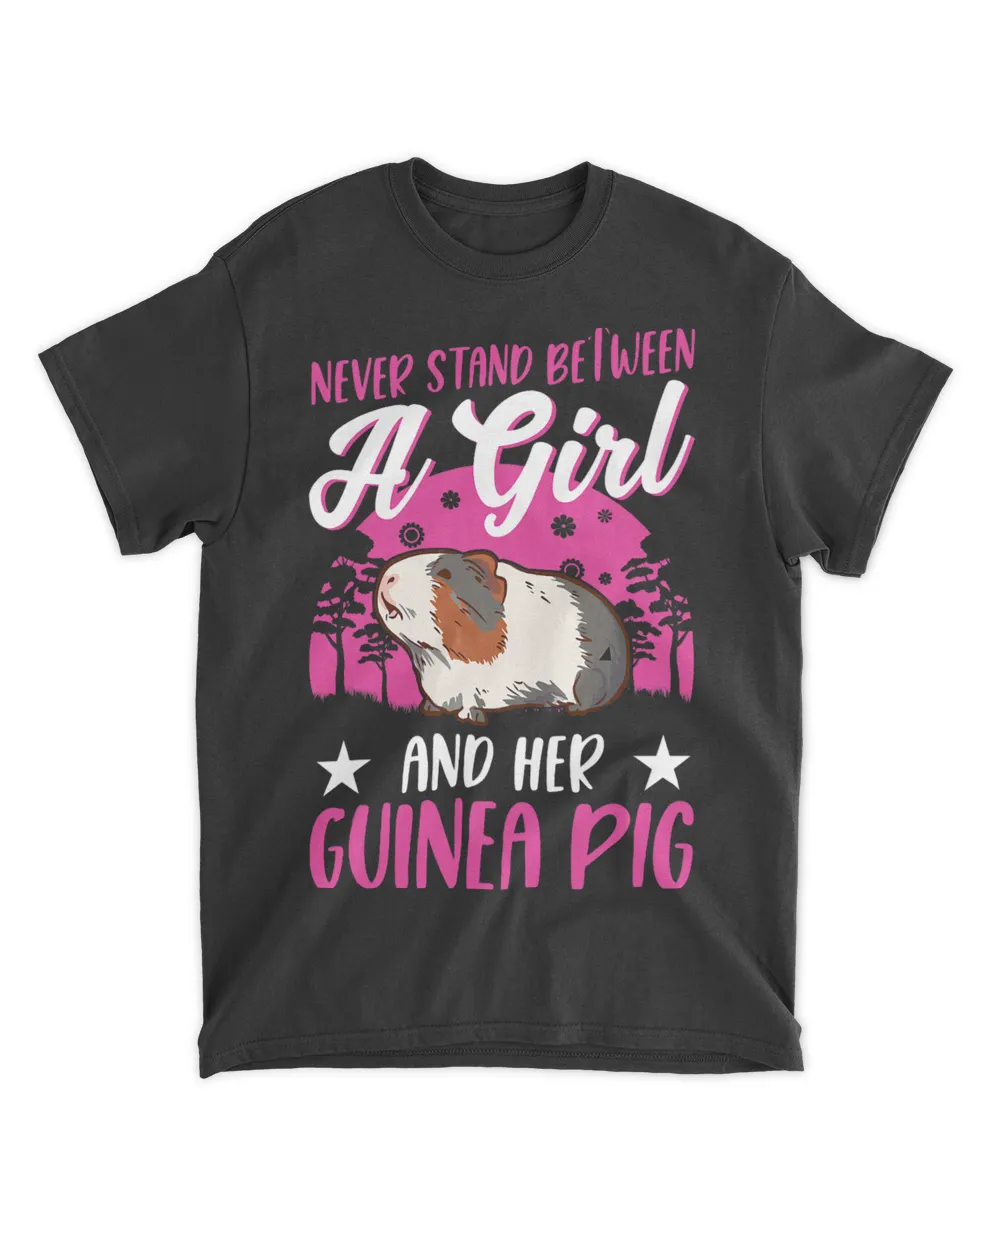 Never stand between a Girl and her Guinea Pig